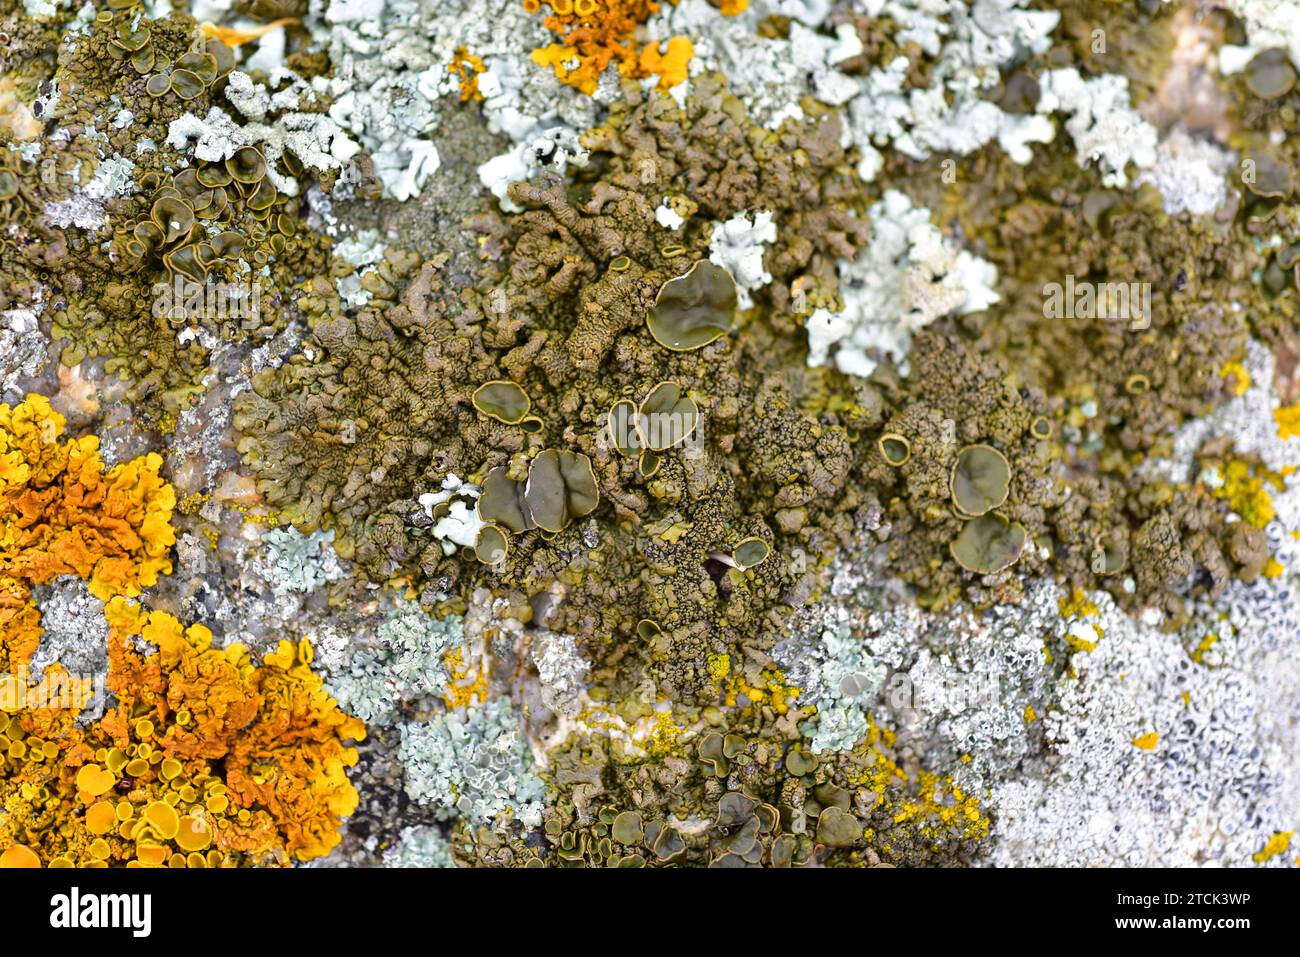 Parmelia pulla, Xanthoparmelia pulla or Neofuscelia pulla is a foliose lichen with brown-greenish apothecia. Hydrated sample. This photo was taken in Stock Photo